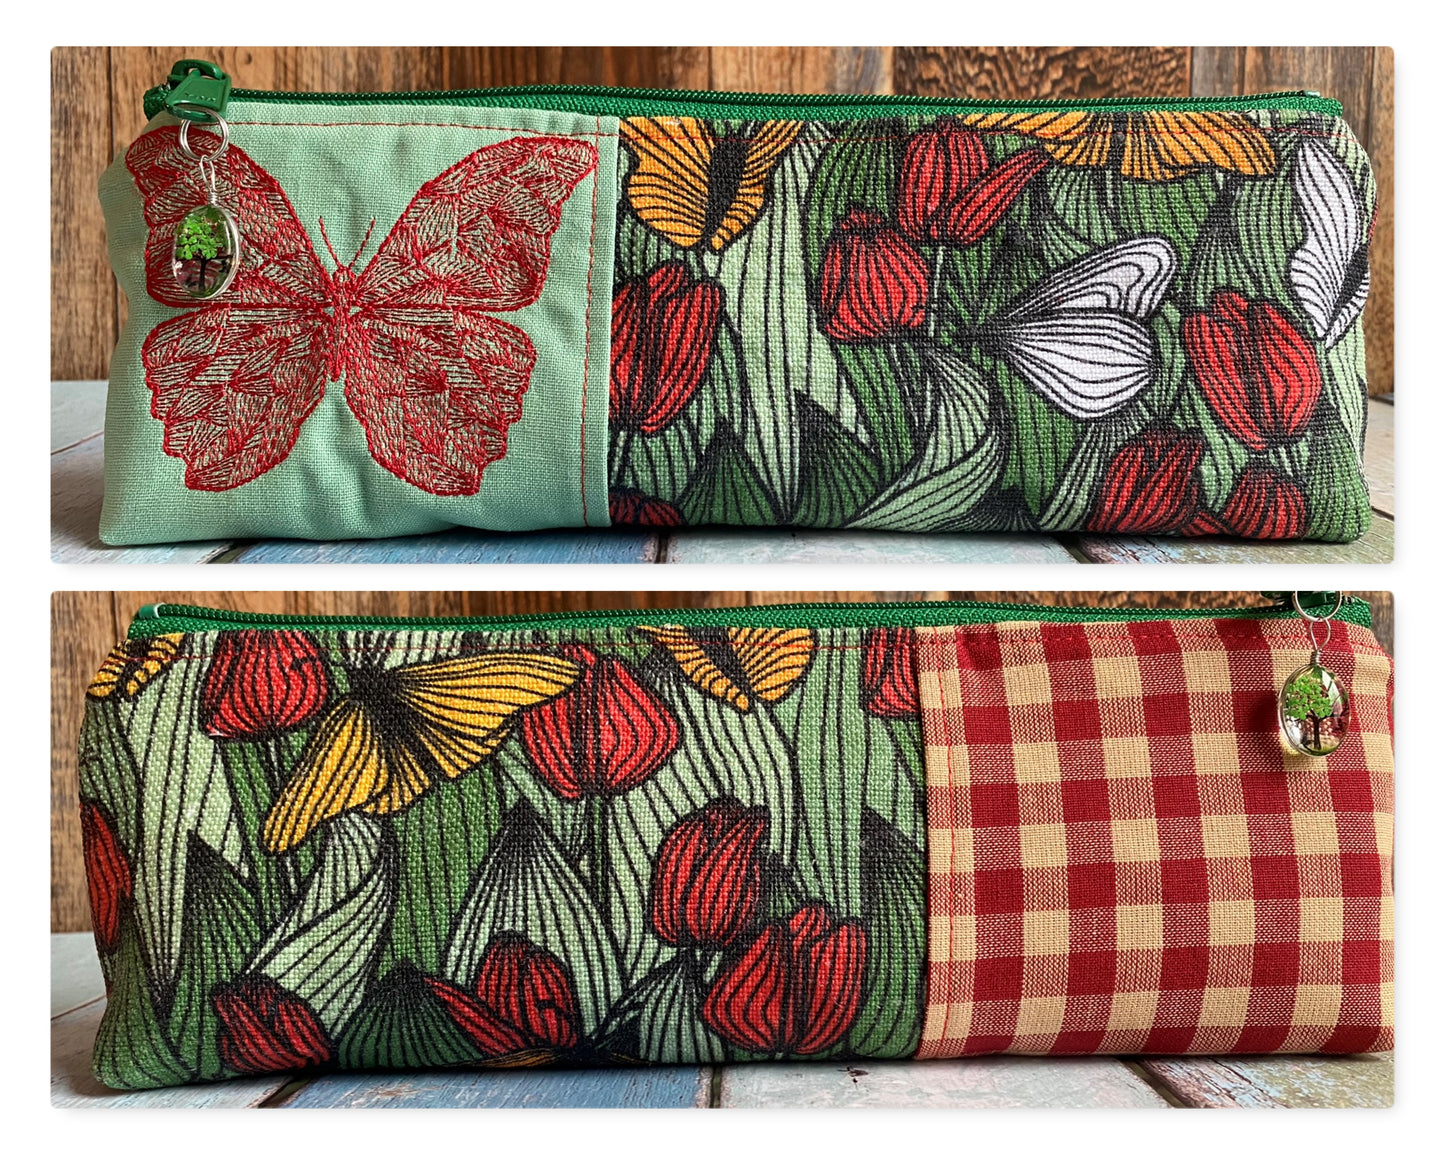 Butterfly Picnic Long and Lean Zipper Bag